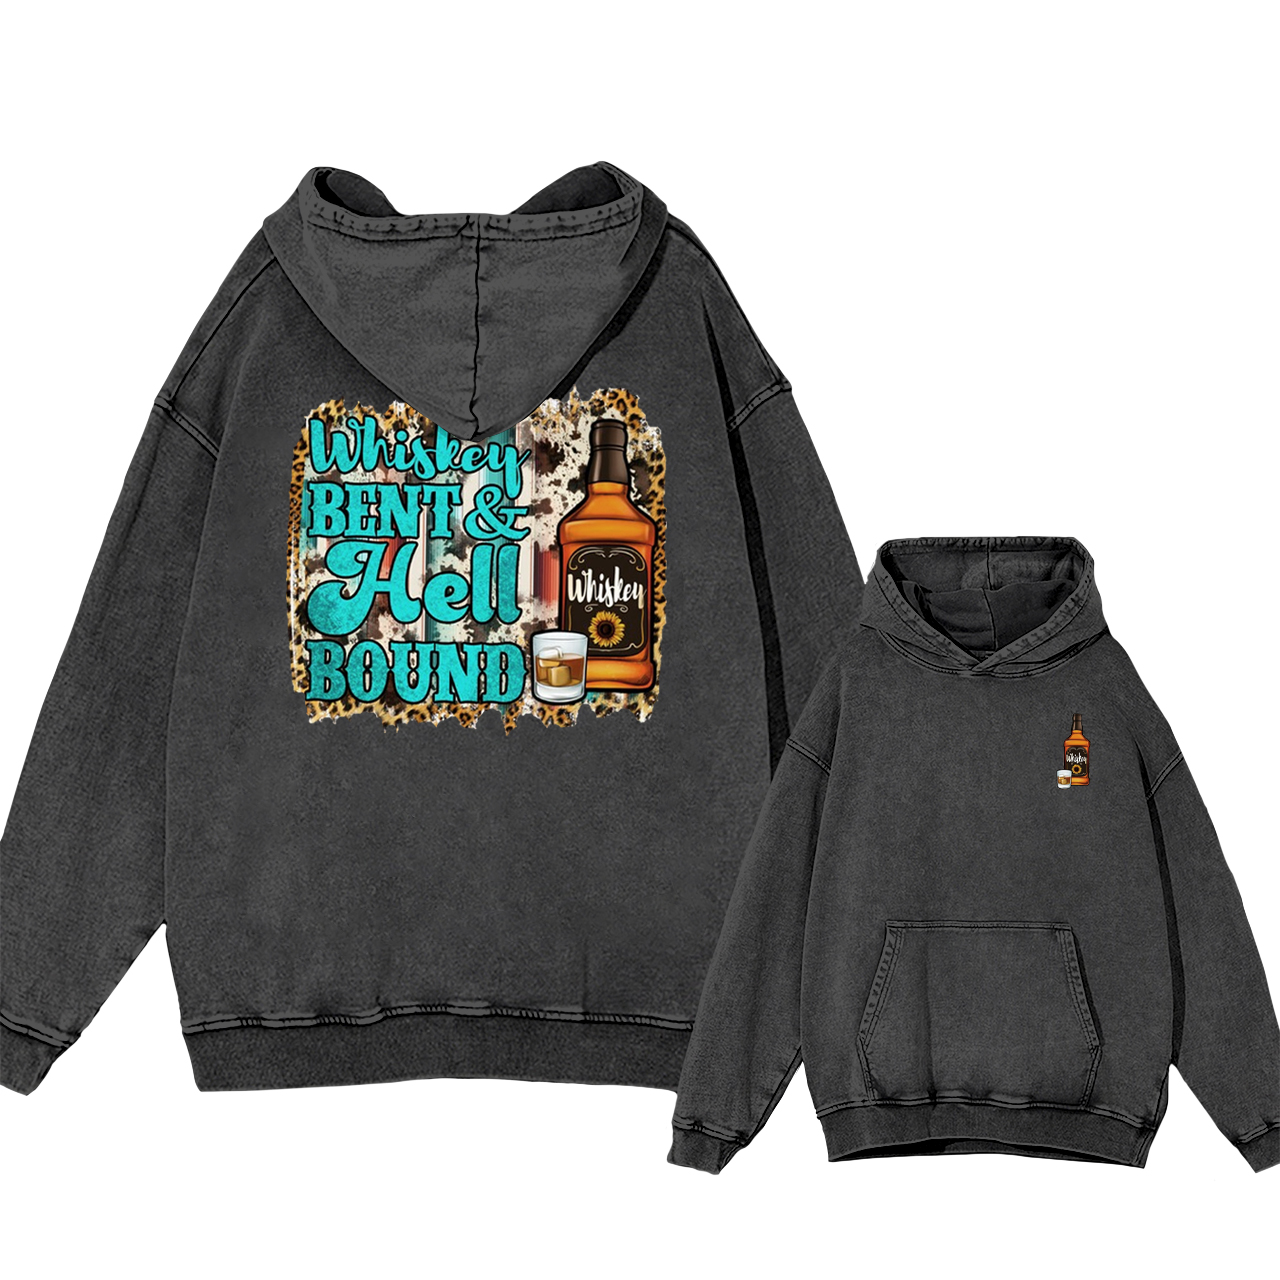 Whiskey Bent And Hell Bound Garment-Dye Hoodies